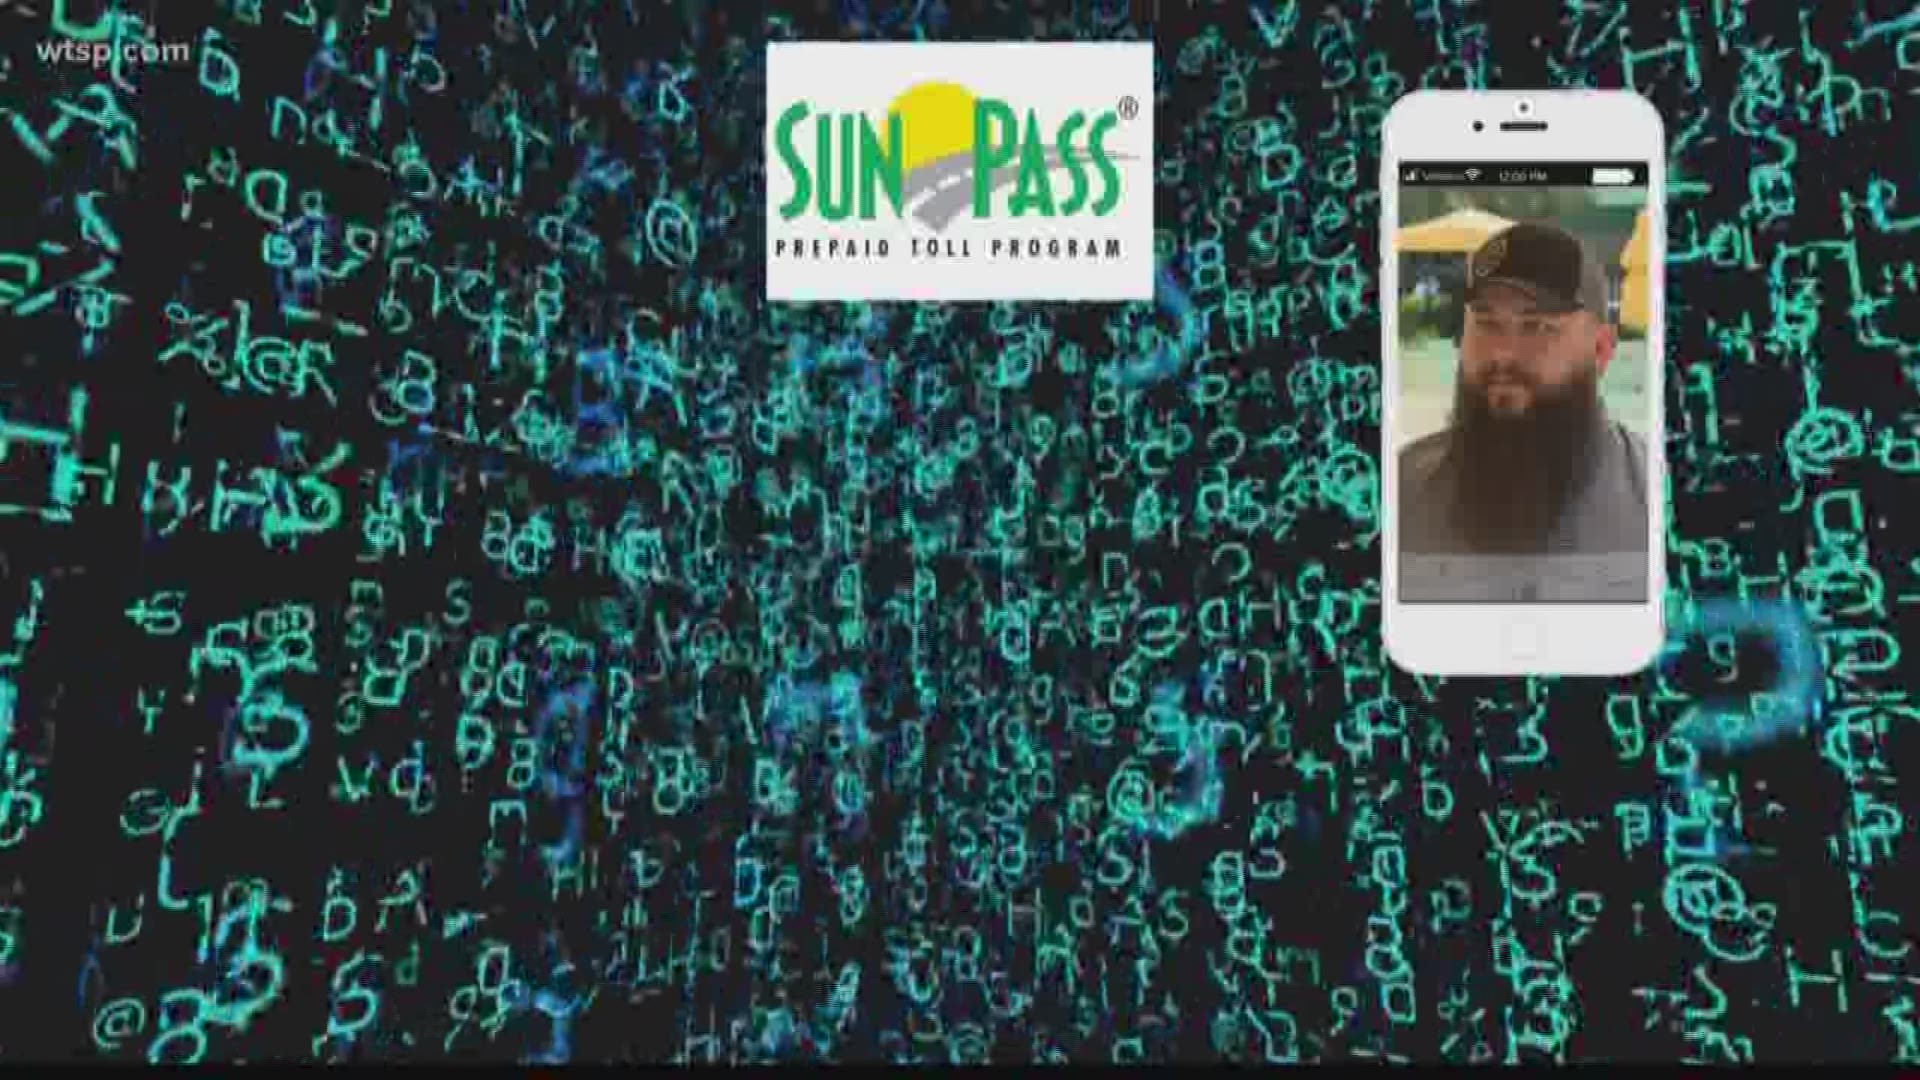 10Investigates continues to expose SunPass problems the state has tried to keep quiet.